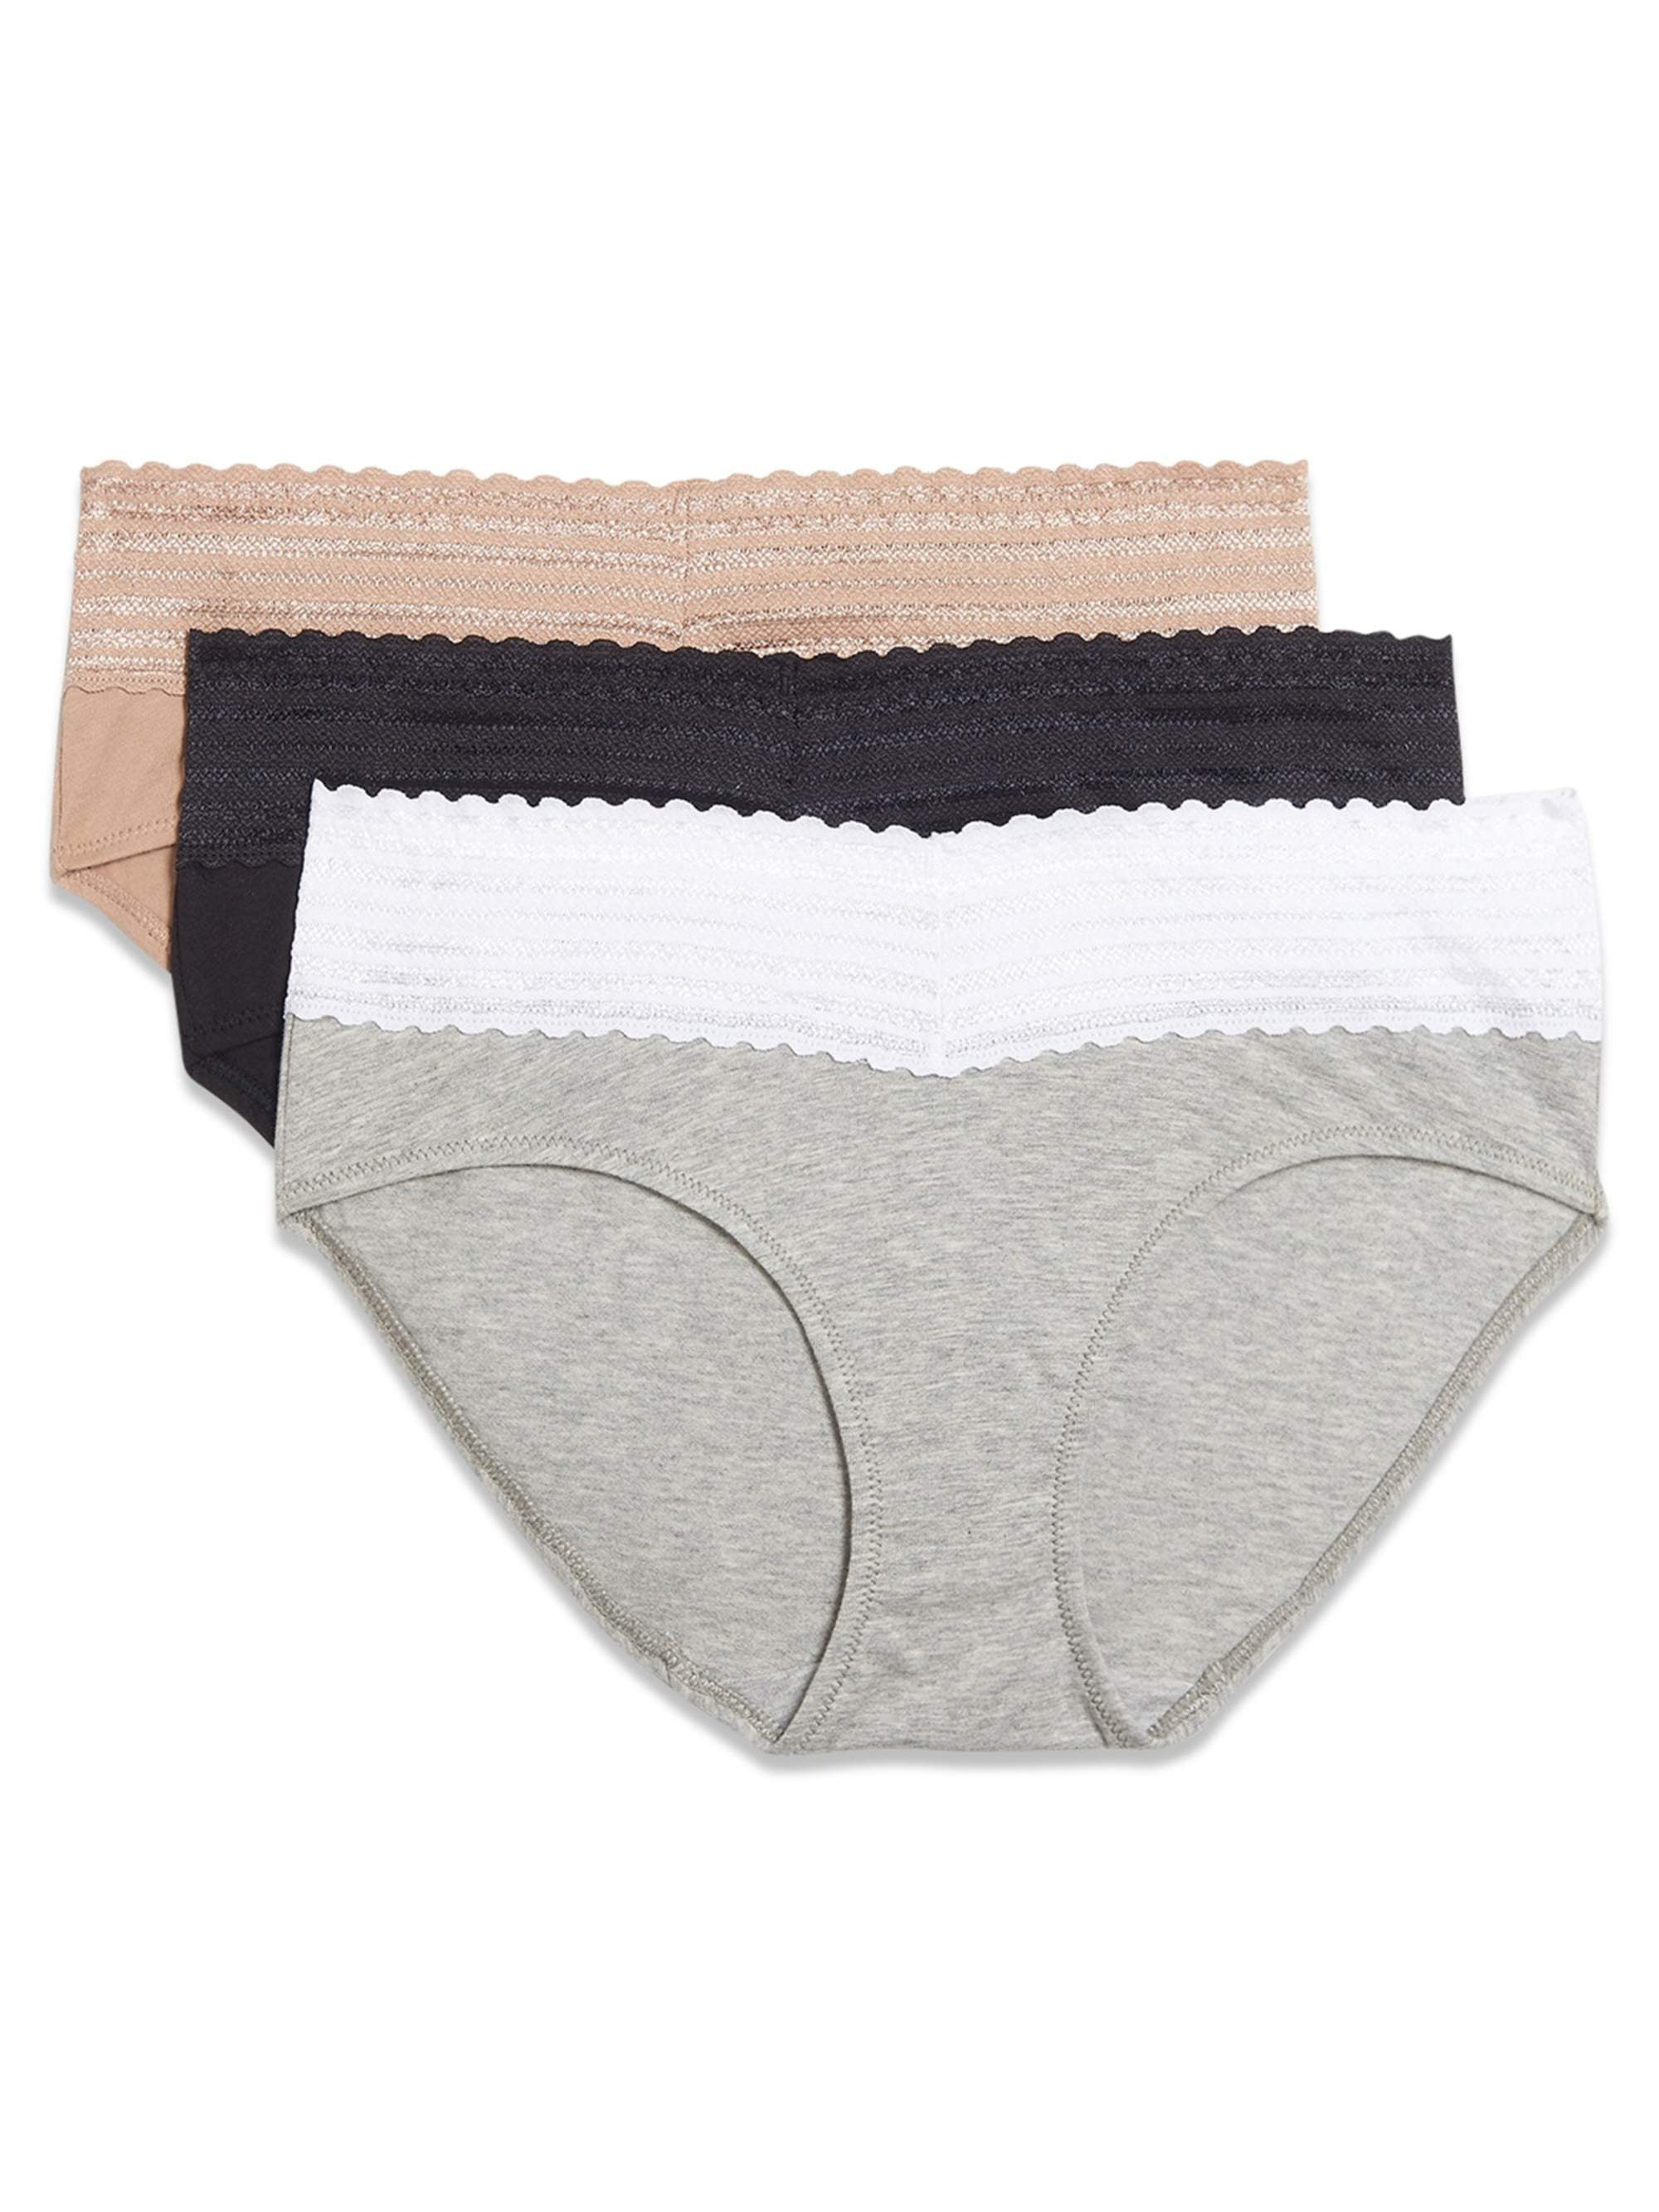 Warners® Blissful Benefits Dig-Free Comfort Waist with Lace Cotton Hipster 3 -Pack RU2263W 